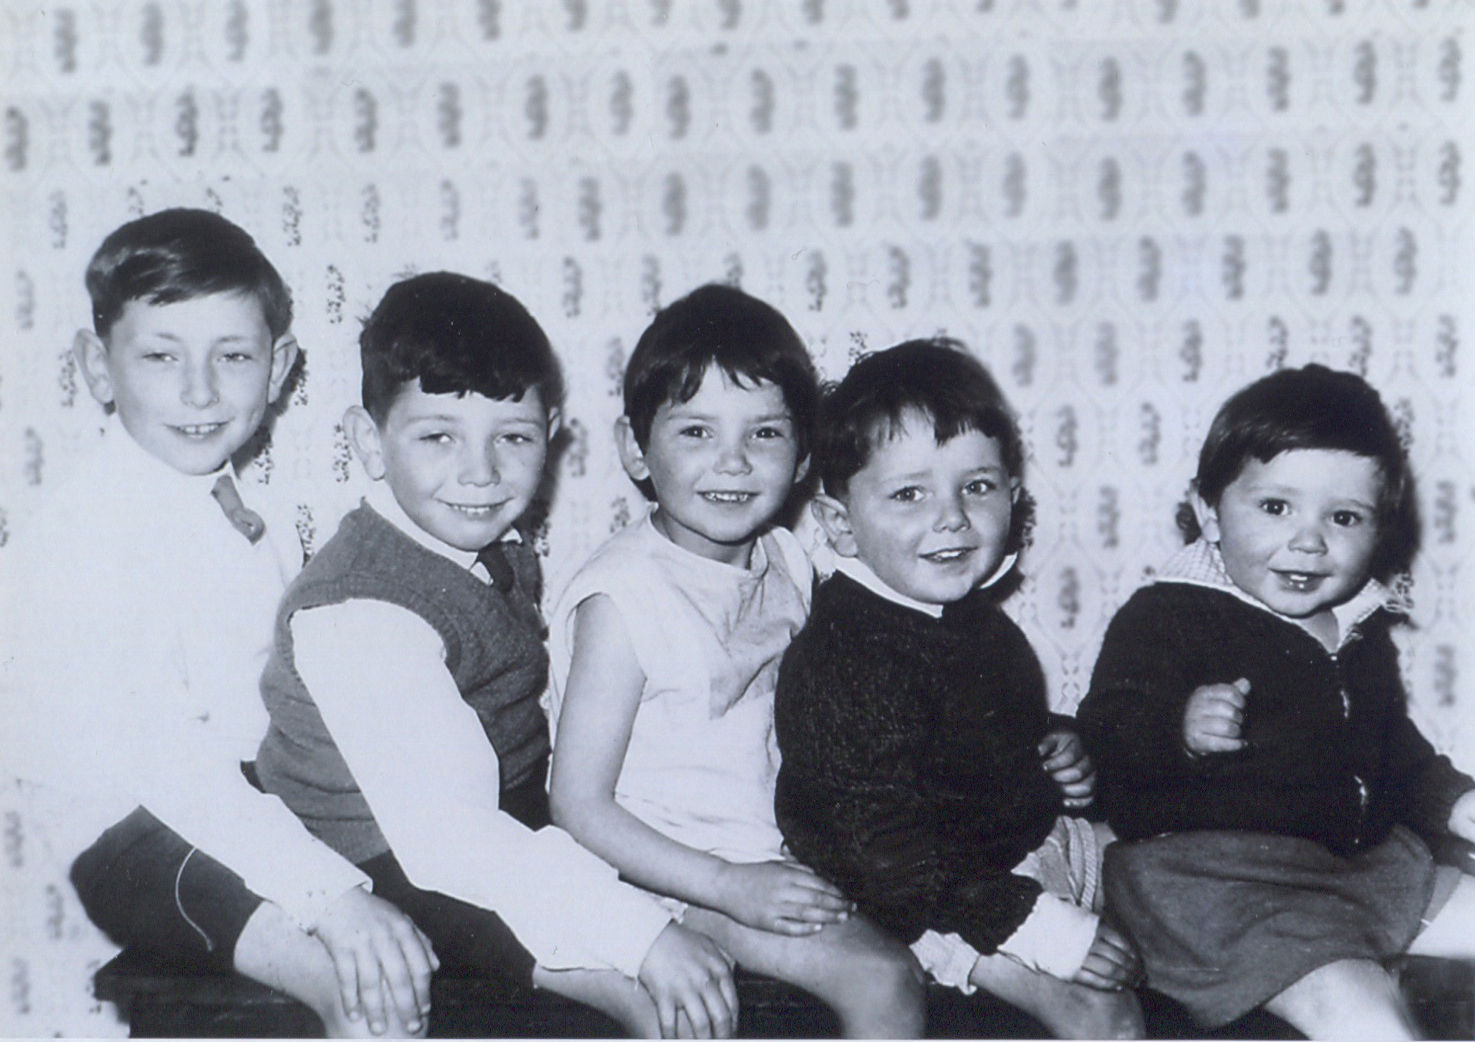 Alex with his brothers and sister in 1966